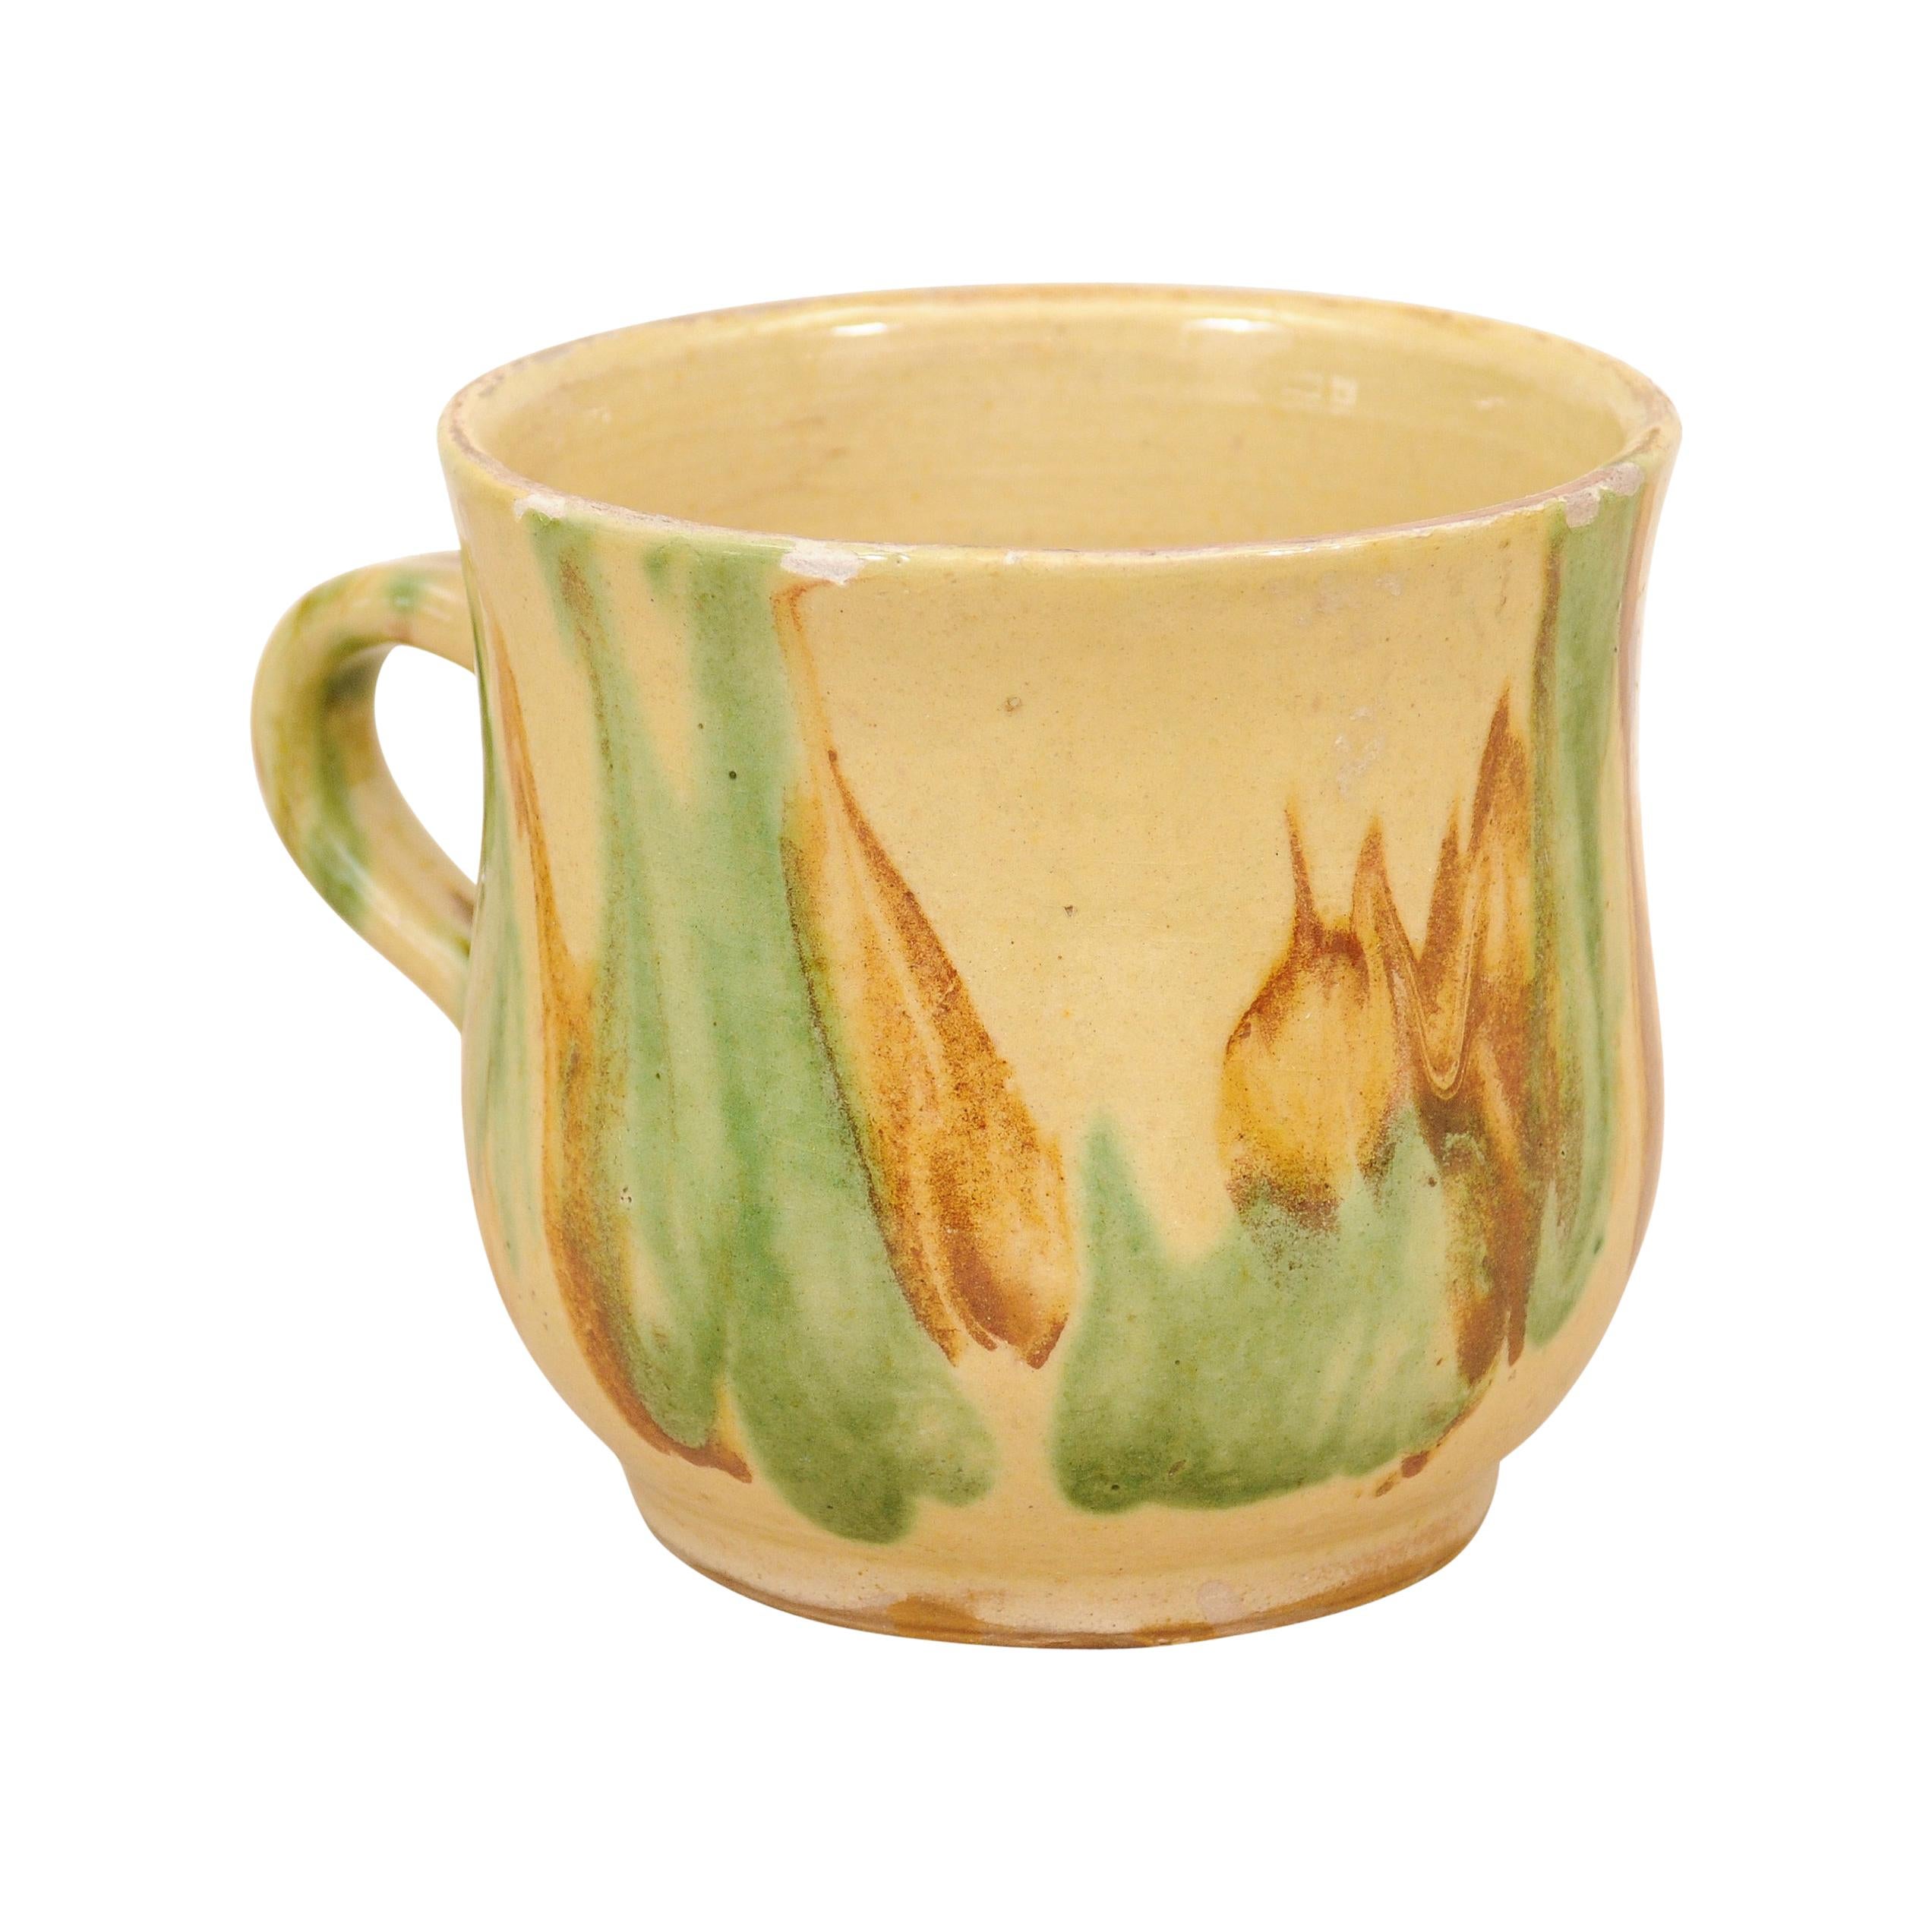 Rustic French 19th Century Pottery Mug with Yellow, Green and Rust Glaze For Sale